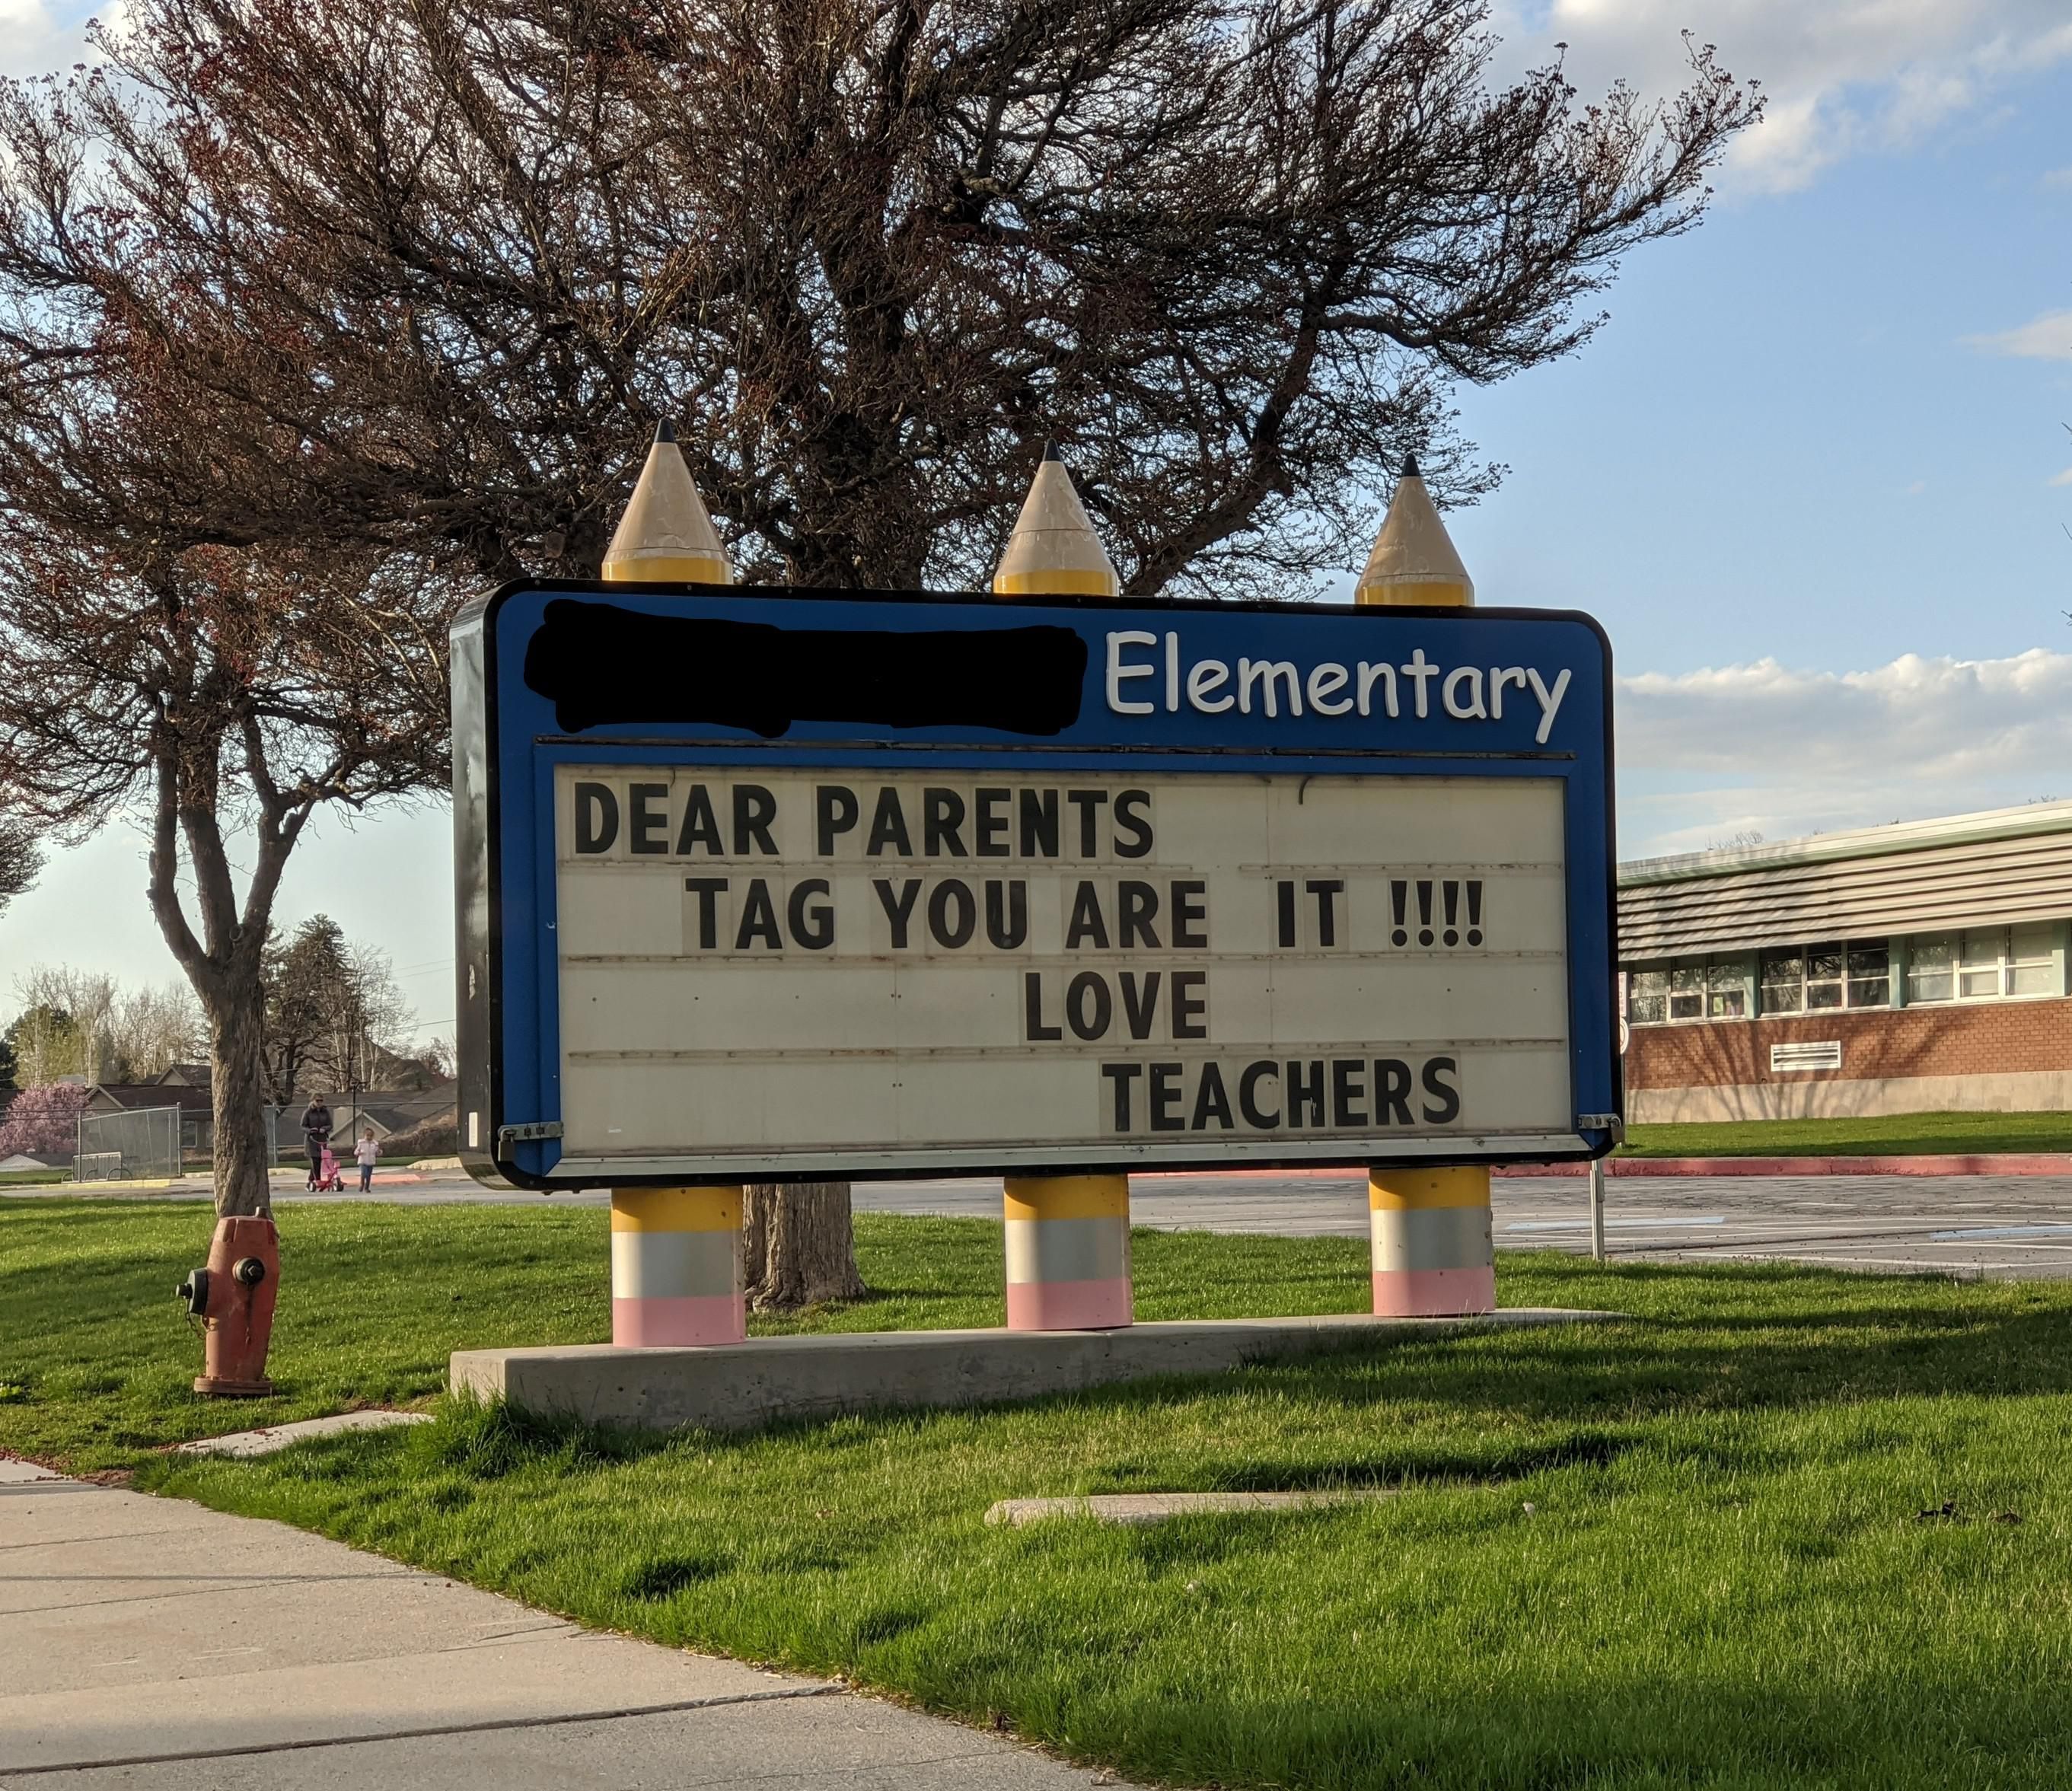 At a school in our neighborhood. Too soon?